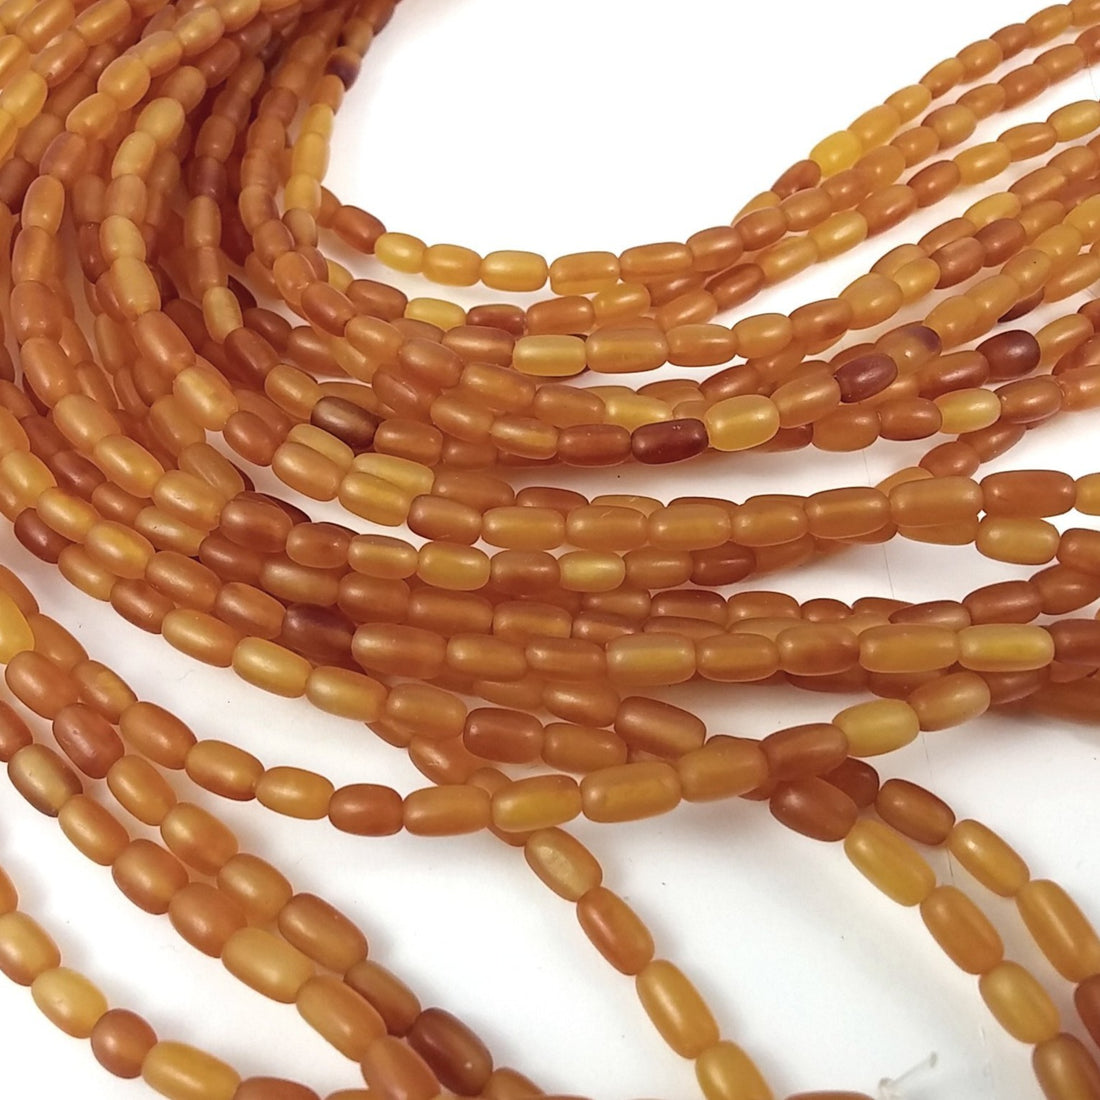 60 Natural amber horn rice beads 7x4mm - eco friendly and natural horn beads